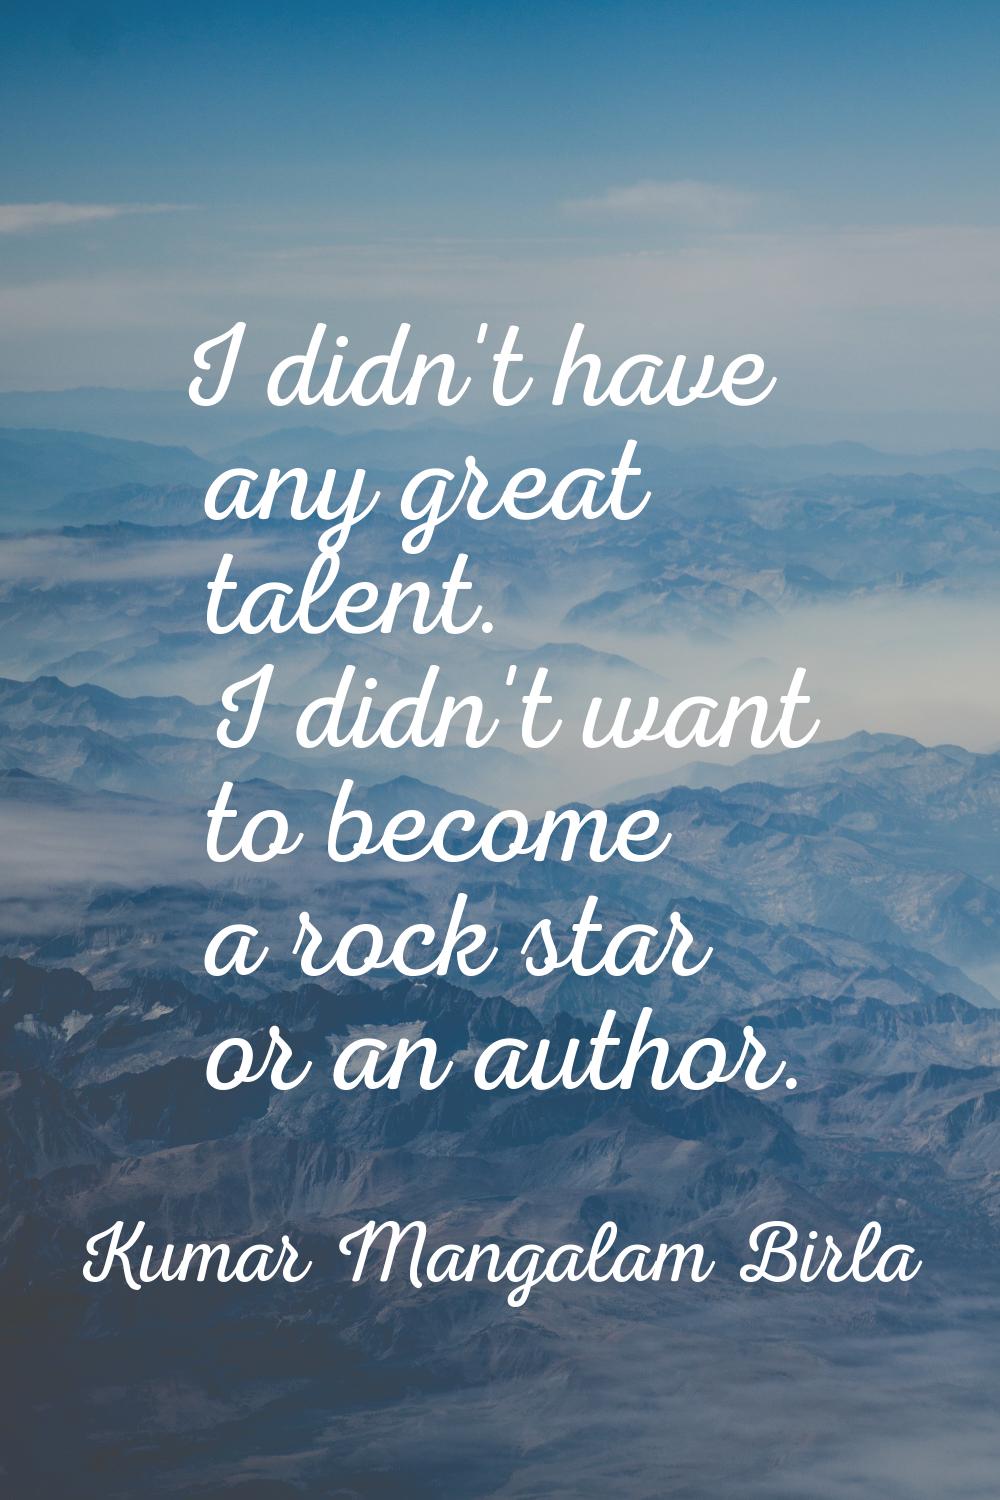 I didn't have any great talent. I didn't want to become a rock star or an author.